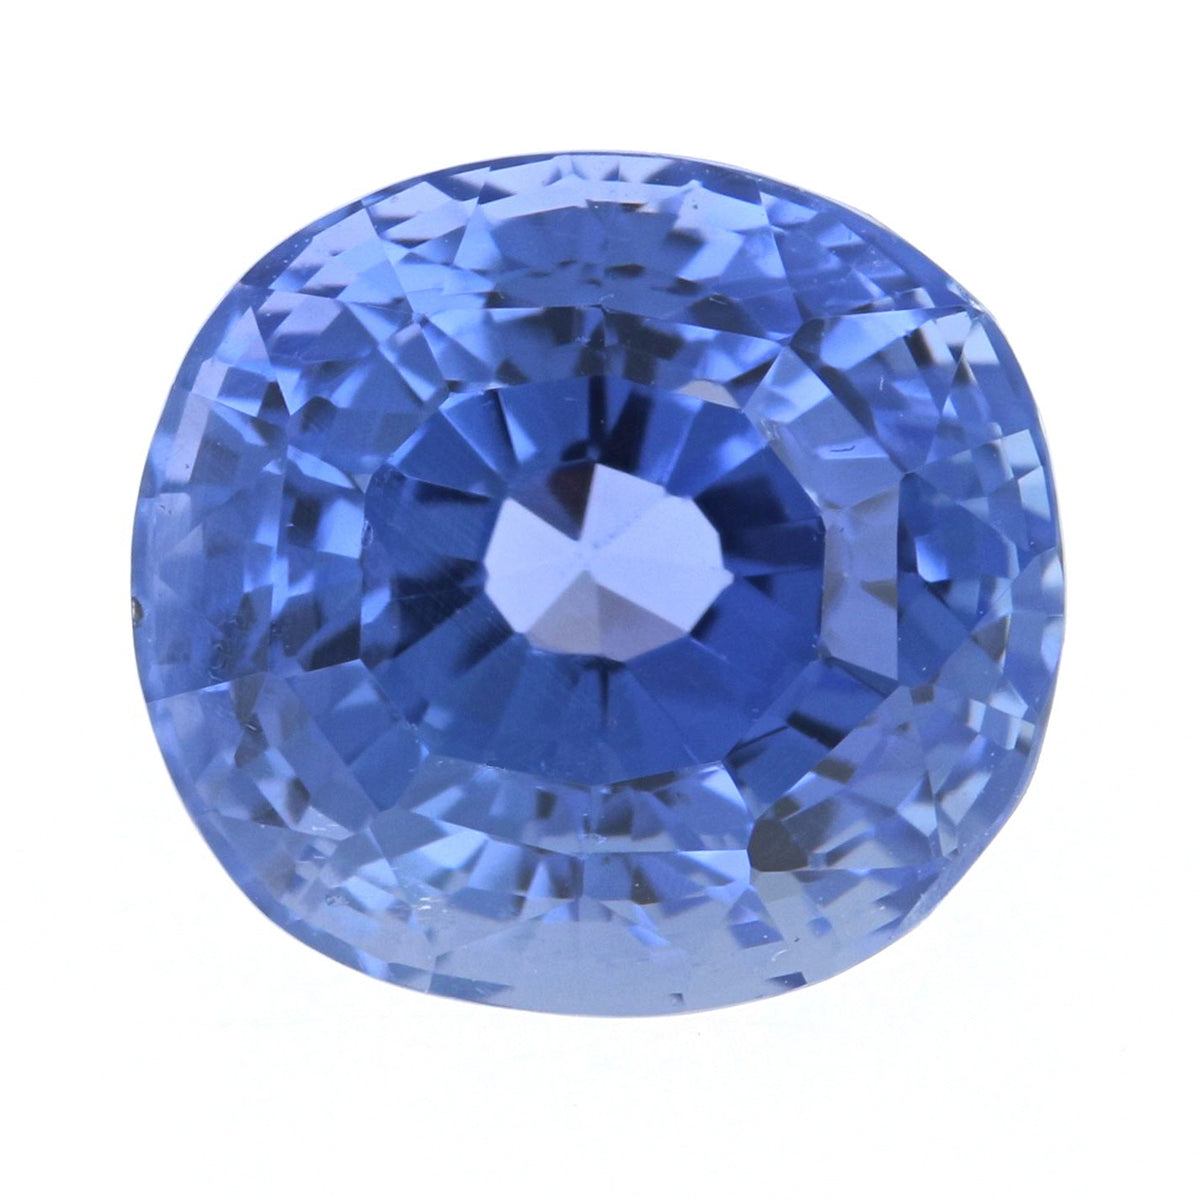 5.13ct Loose Color Change Sapphire Oval GIA